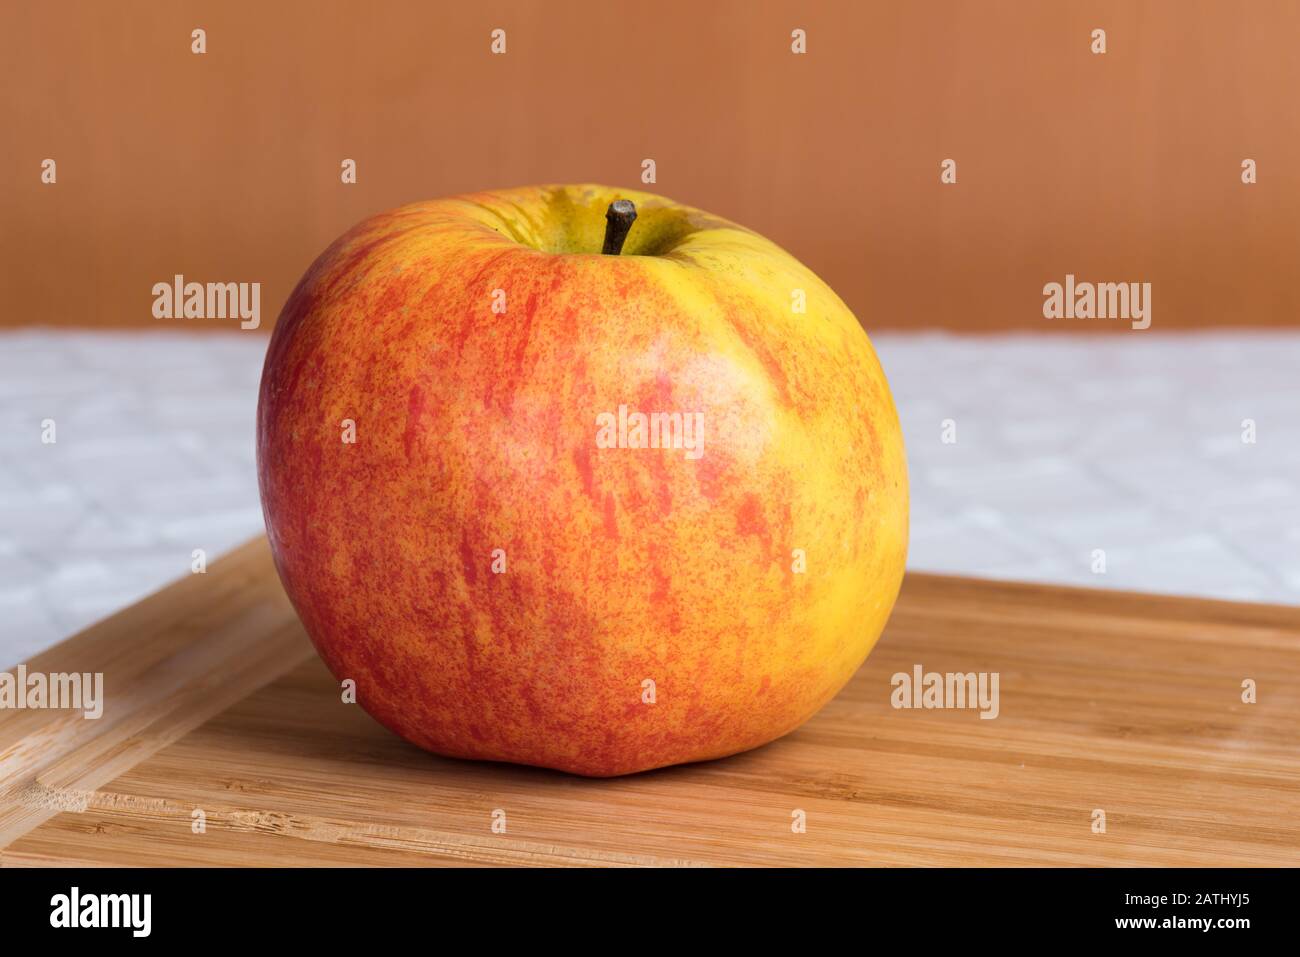 A ripe apple (malus domestica) is lying on a wooden board on a kitchen table. Stock Photo